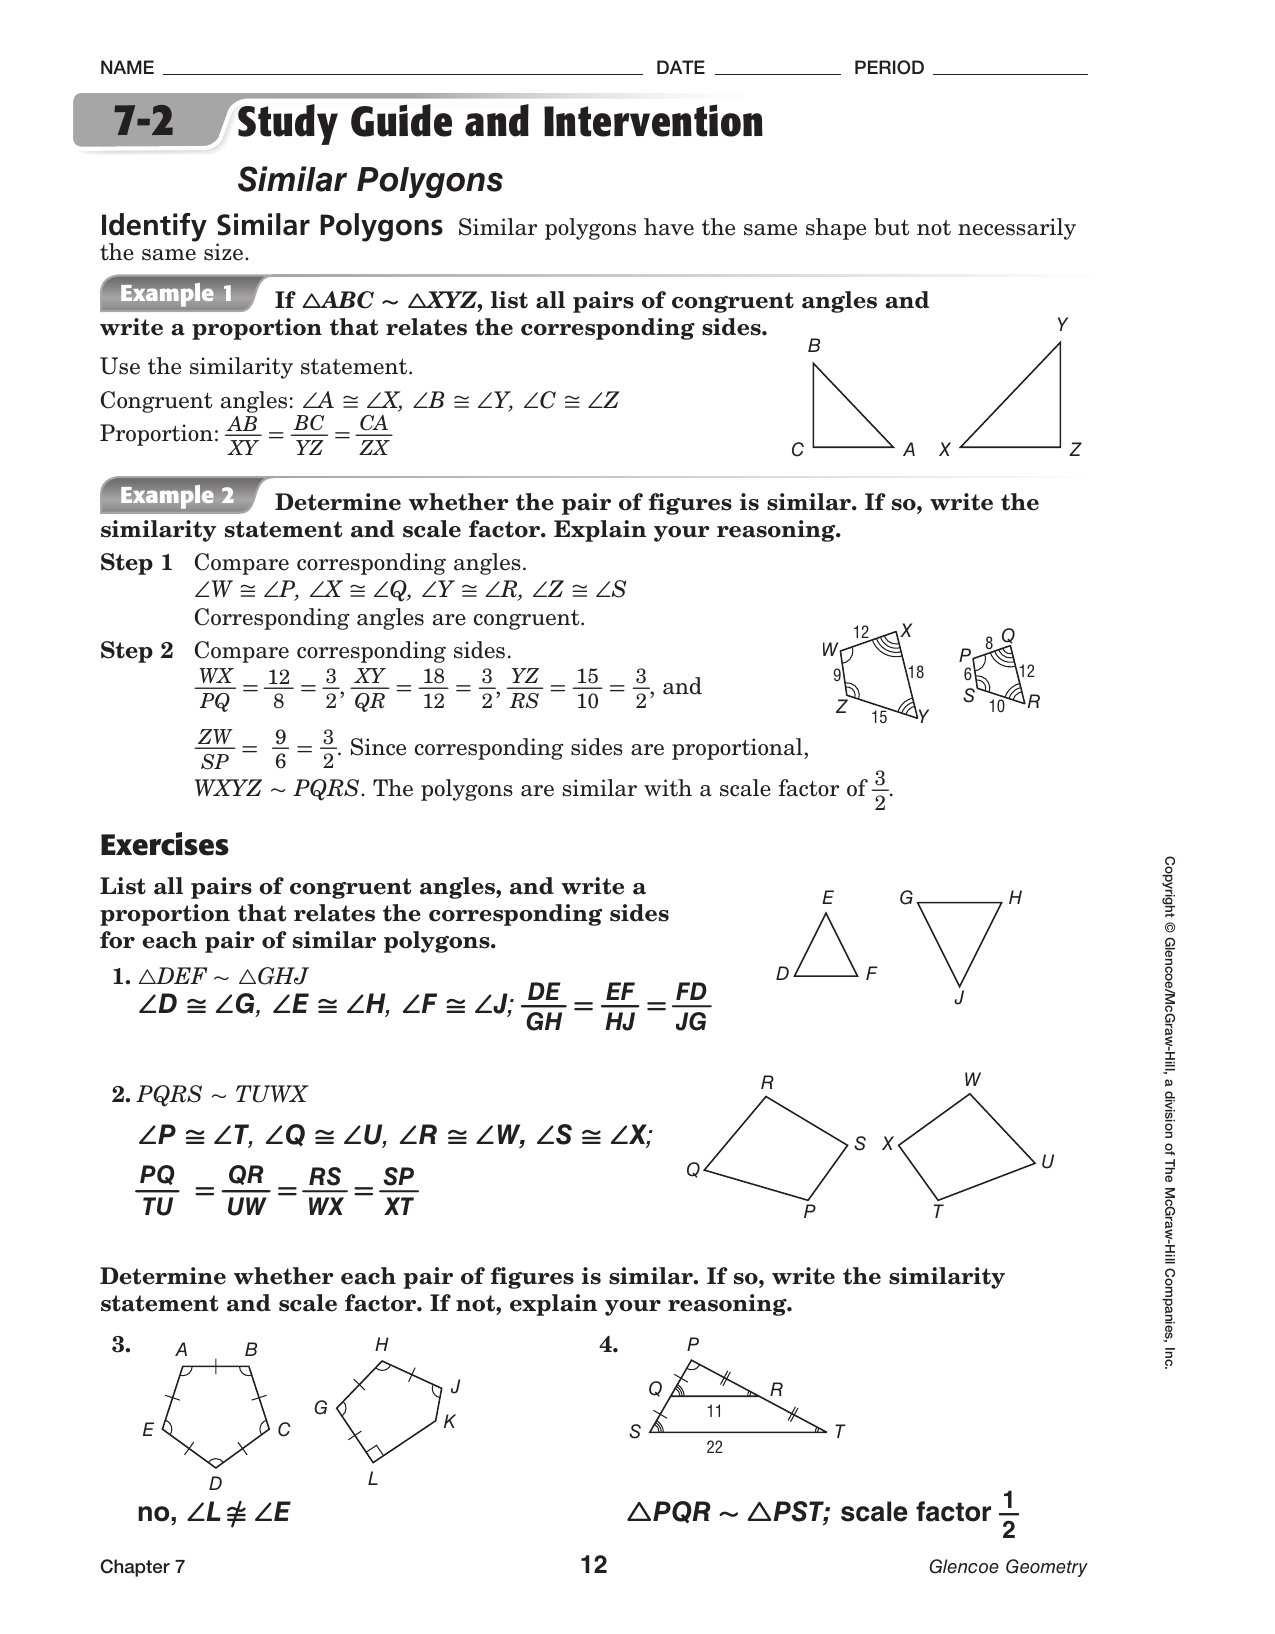 200-20 Answers - Georgetown ISD Intended For Similar Polygons Worksheet Answers